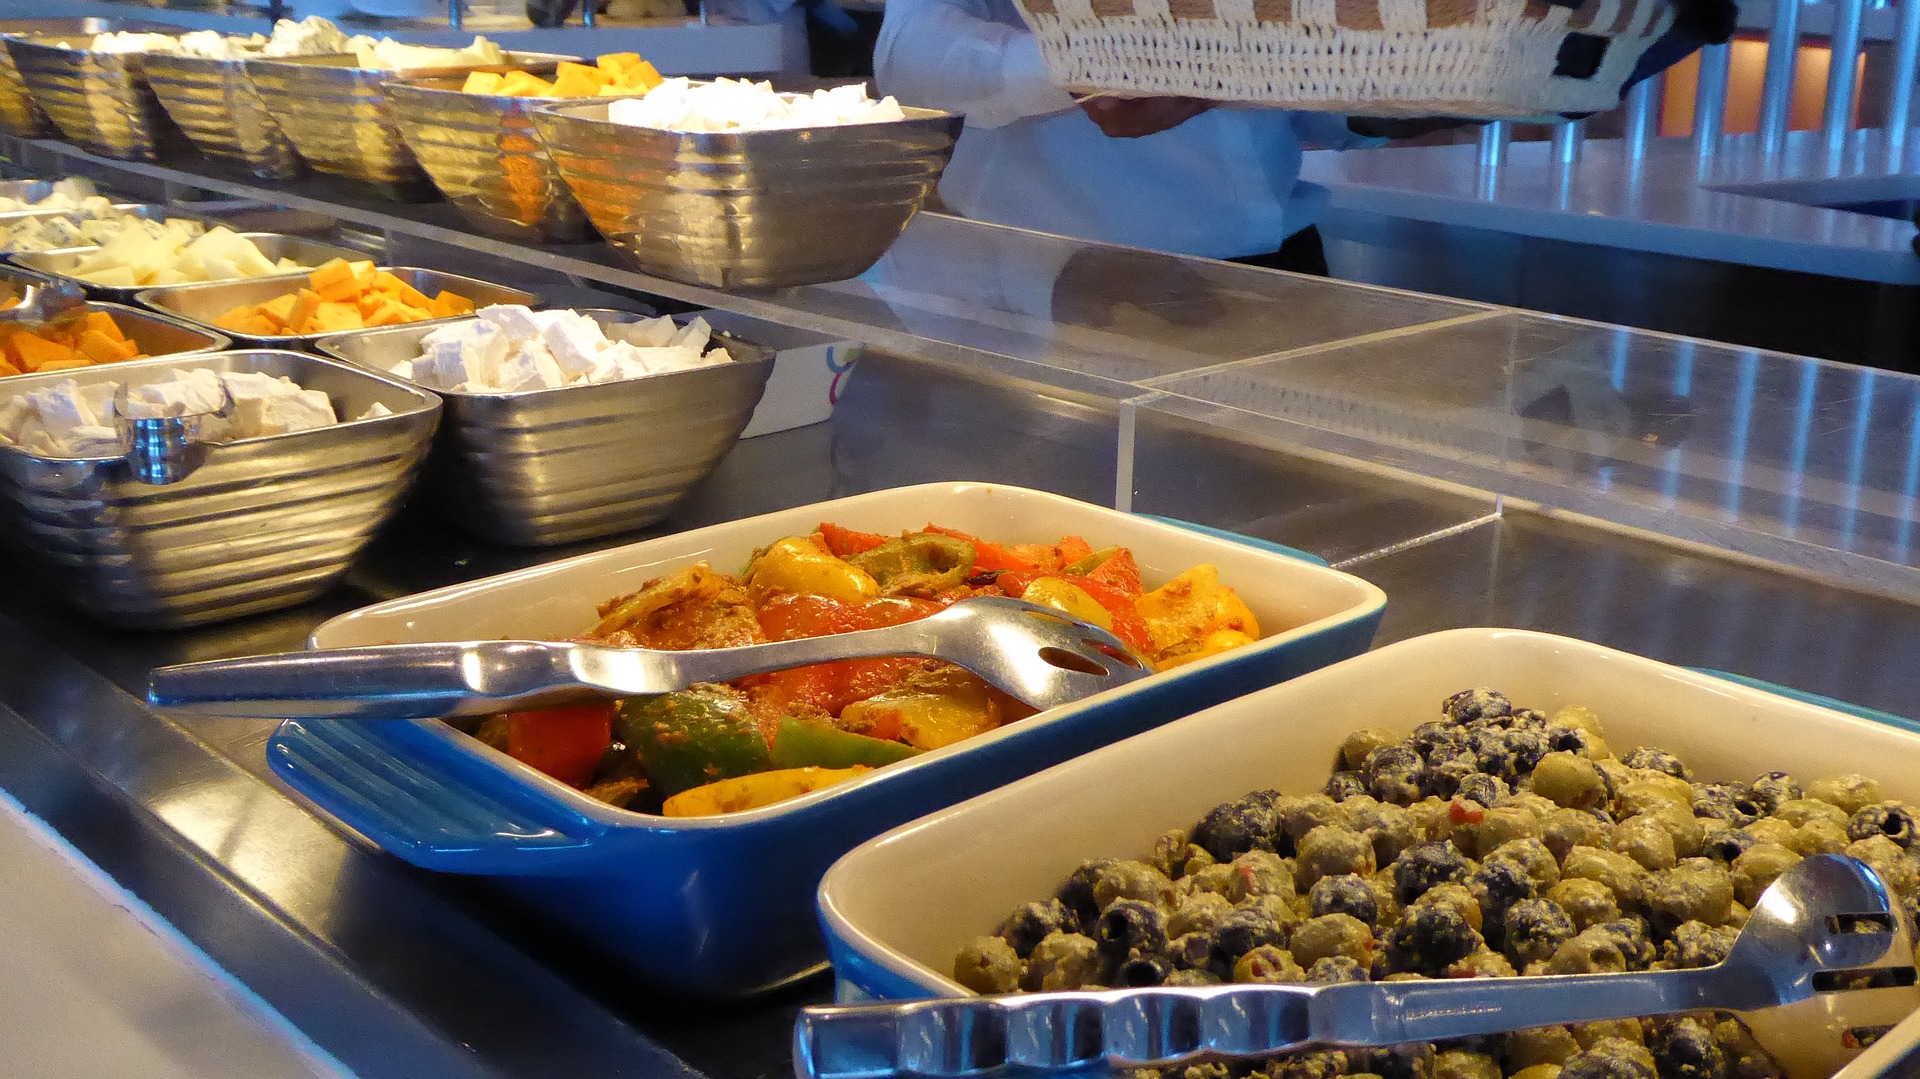 Enjoy having the best meal at the Best Dinner Buffet in Abu Dhabi